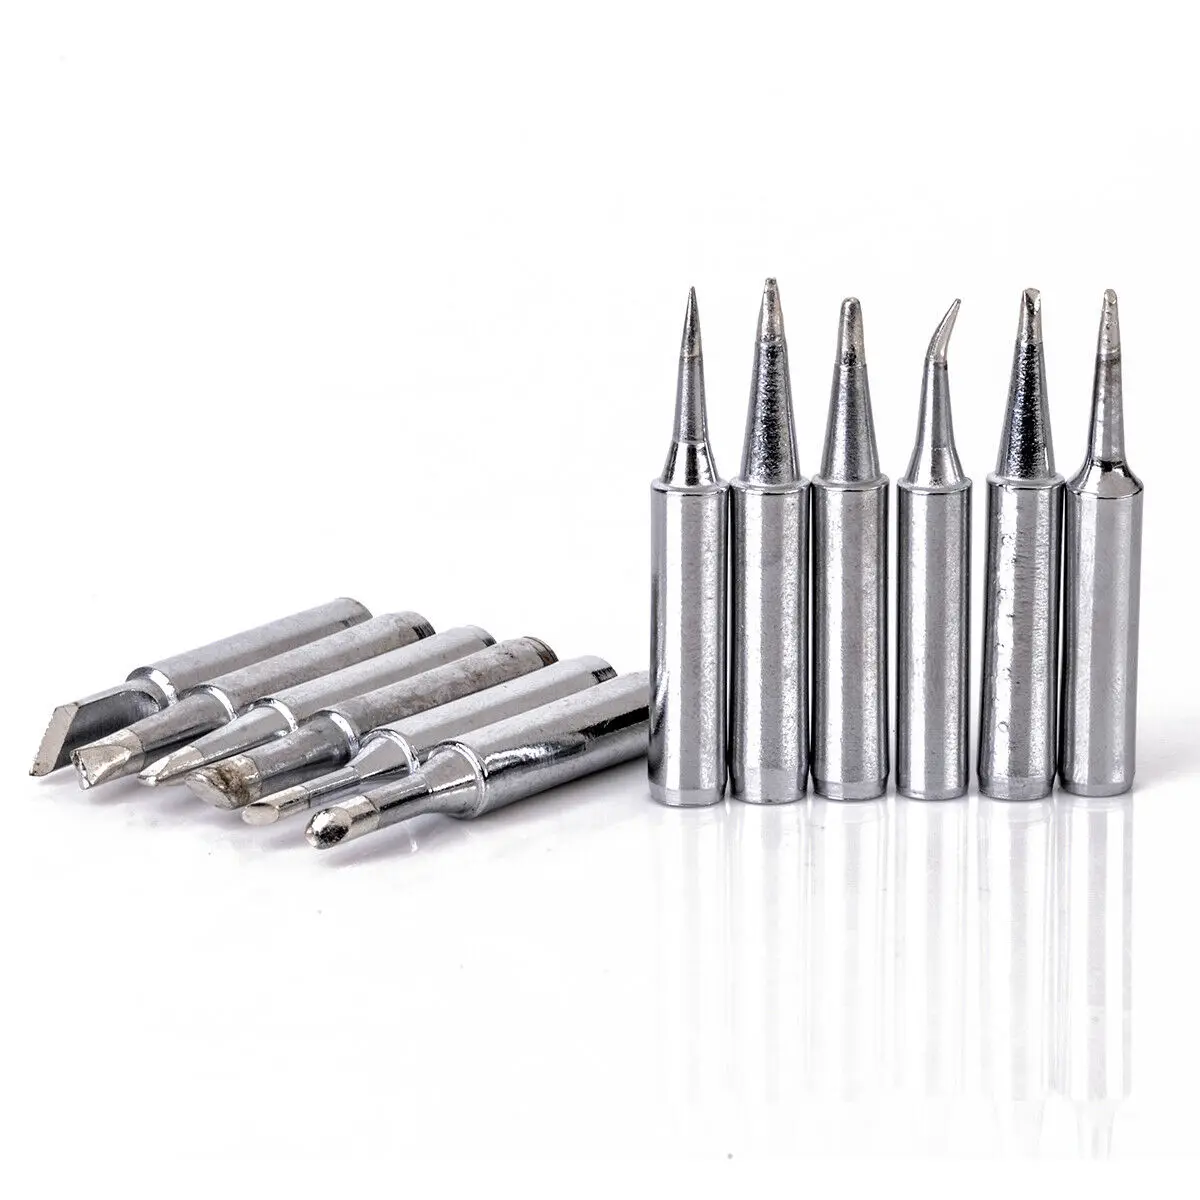 

12pcs Soldering Iron Tips 900M-T Electric Welding Tips Replacement Accessories For Hakko 907 933 926 937 928 94 Station Tools